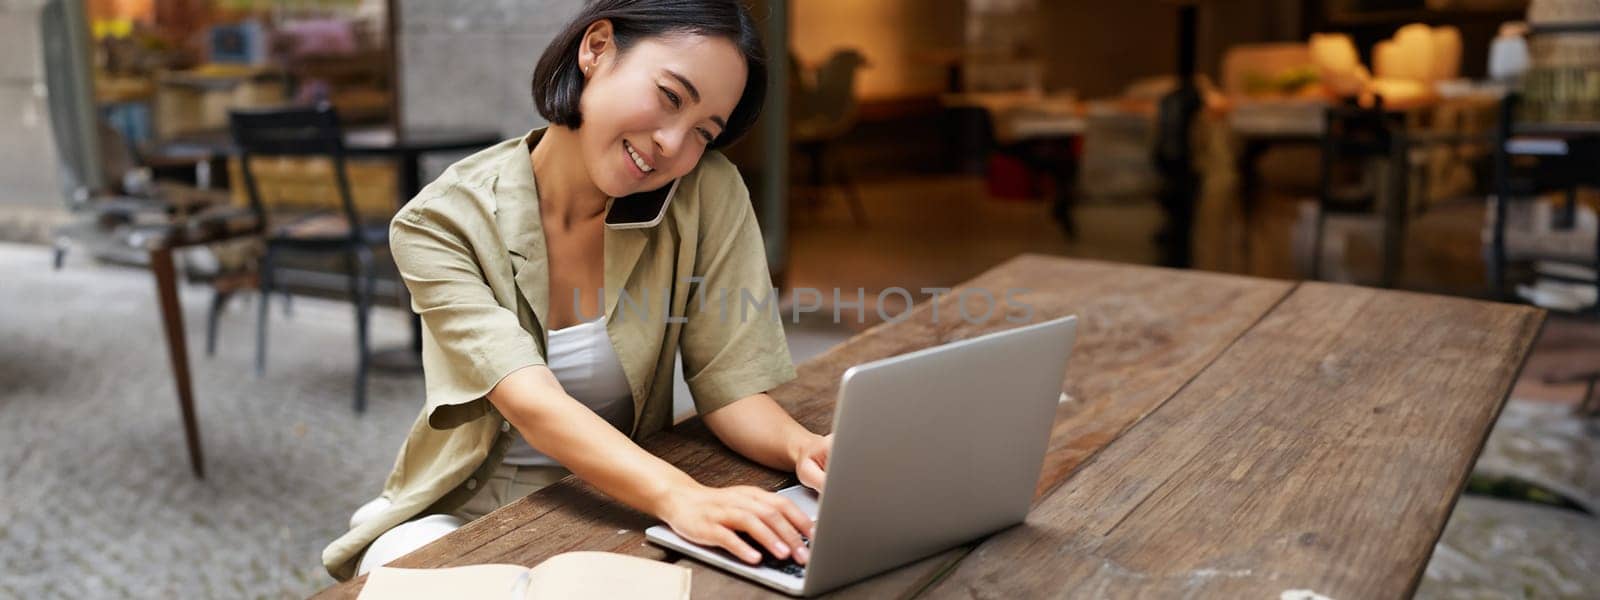 Portrait of young woman talking on mobile phone while typing, using laptop, working remotely from outdoo cafe, doing homework and calling.